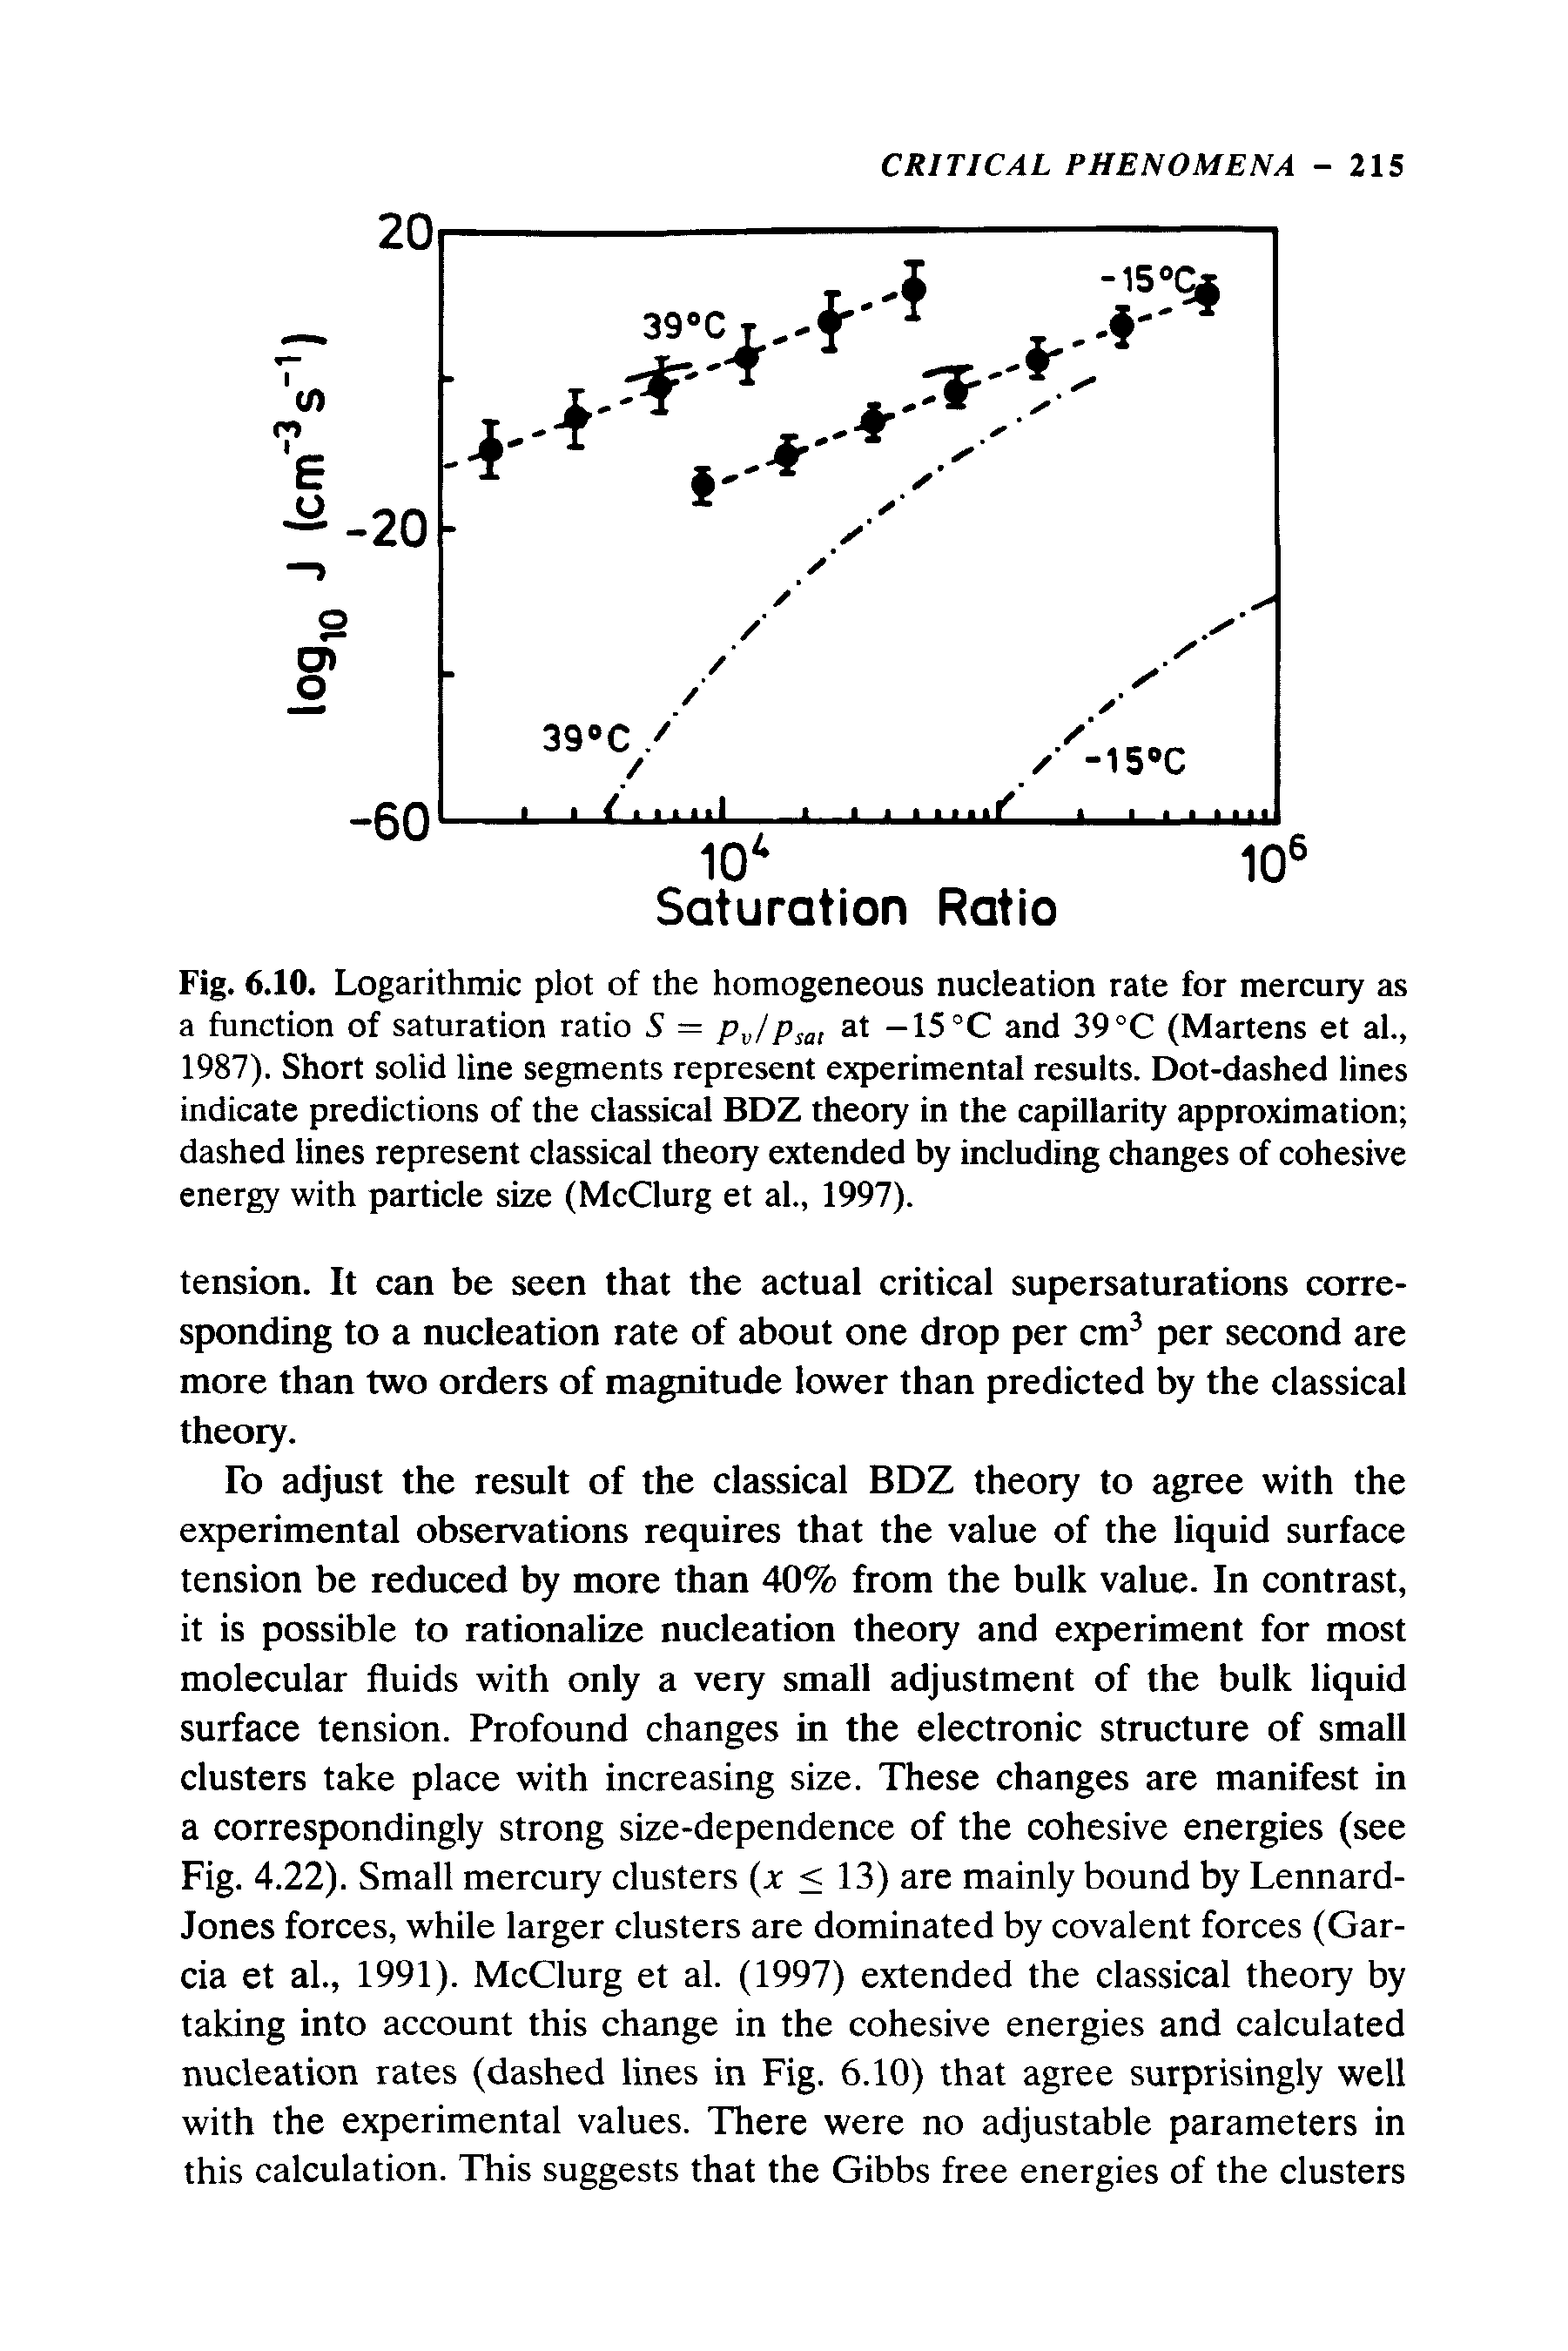 Fig. 6.10. Logarithmic plot of the homogeneous nucleation rate for mercury as a function of saturation ratio S = p lPsat -15°C and 39 °C (Martens et al., 1987). Short solid line segments represent experimental results. Dot-dashed lines indicate predictions of the classical BDZ theory in the capillarity approximation dashed lines represent classical theory extended by including changes of cohesive energy with particle size (McClurg et al., 1997).